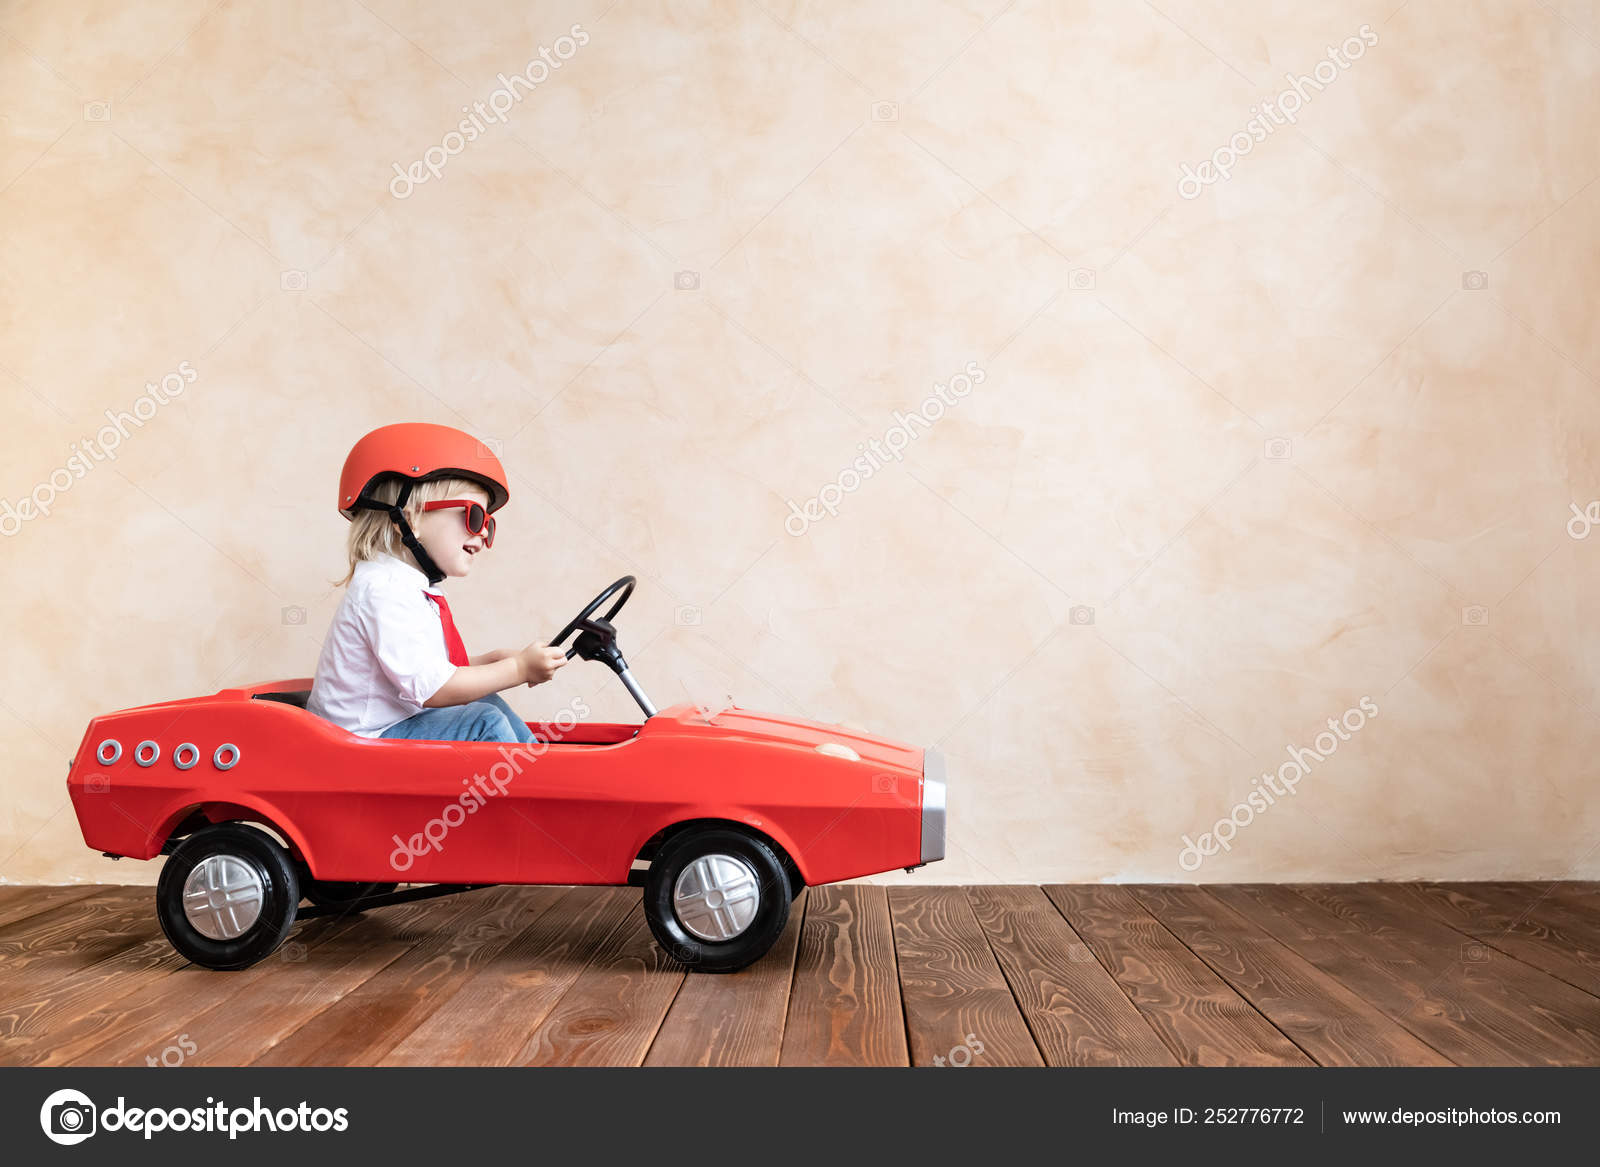 kids driving toy cars